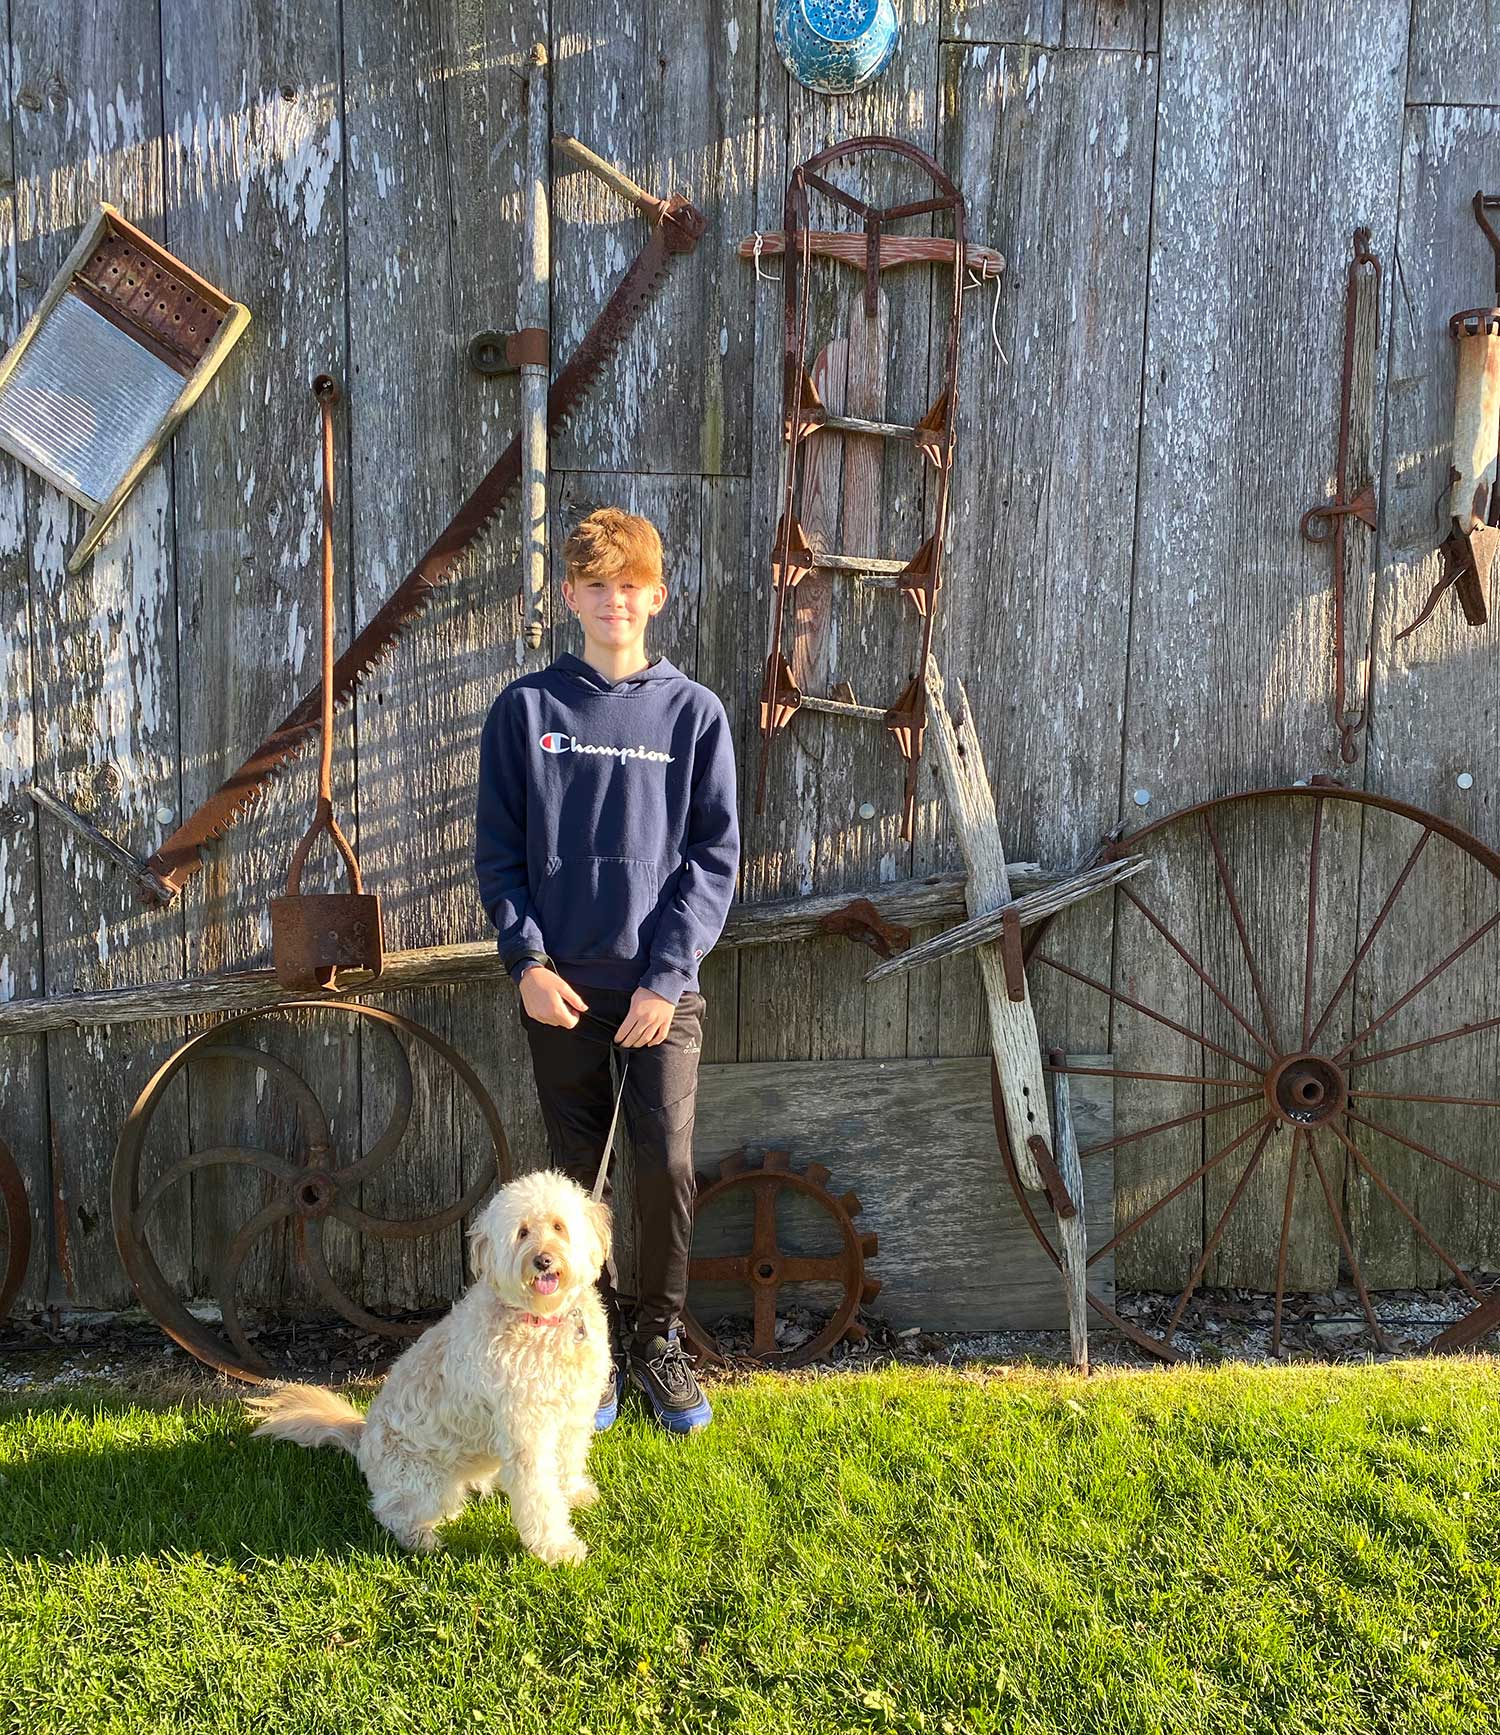 young red headed boy in front of old wooden building with antique wheels and tools hanging on walls holding mini goldendoodle